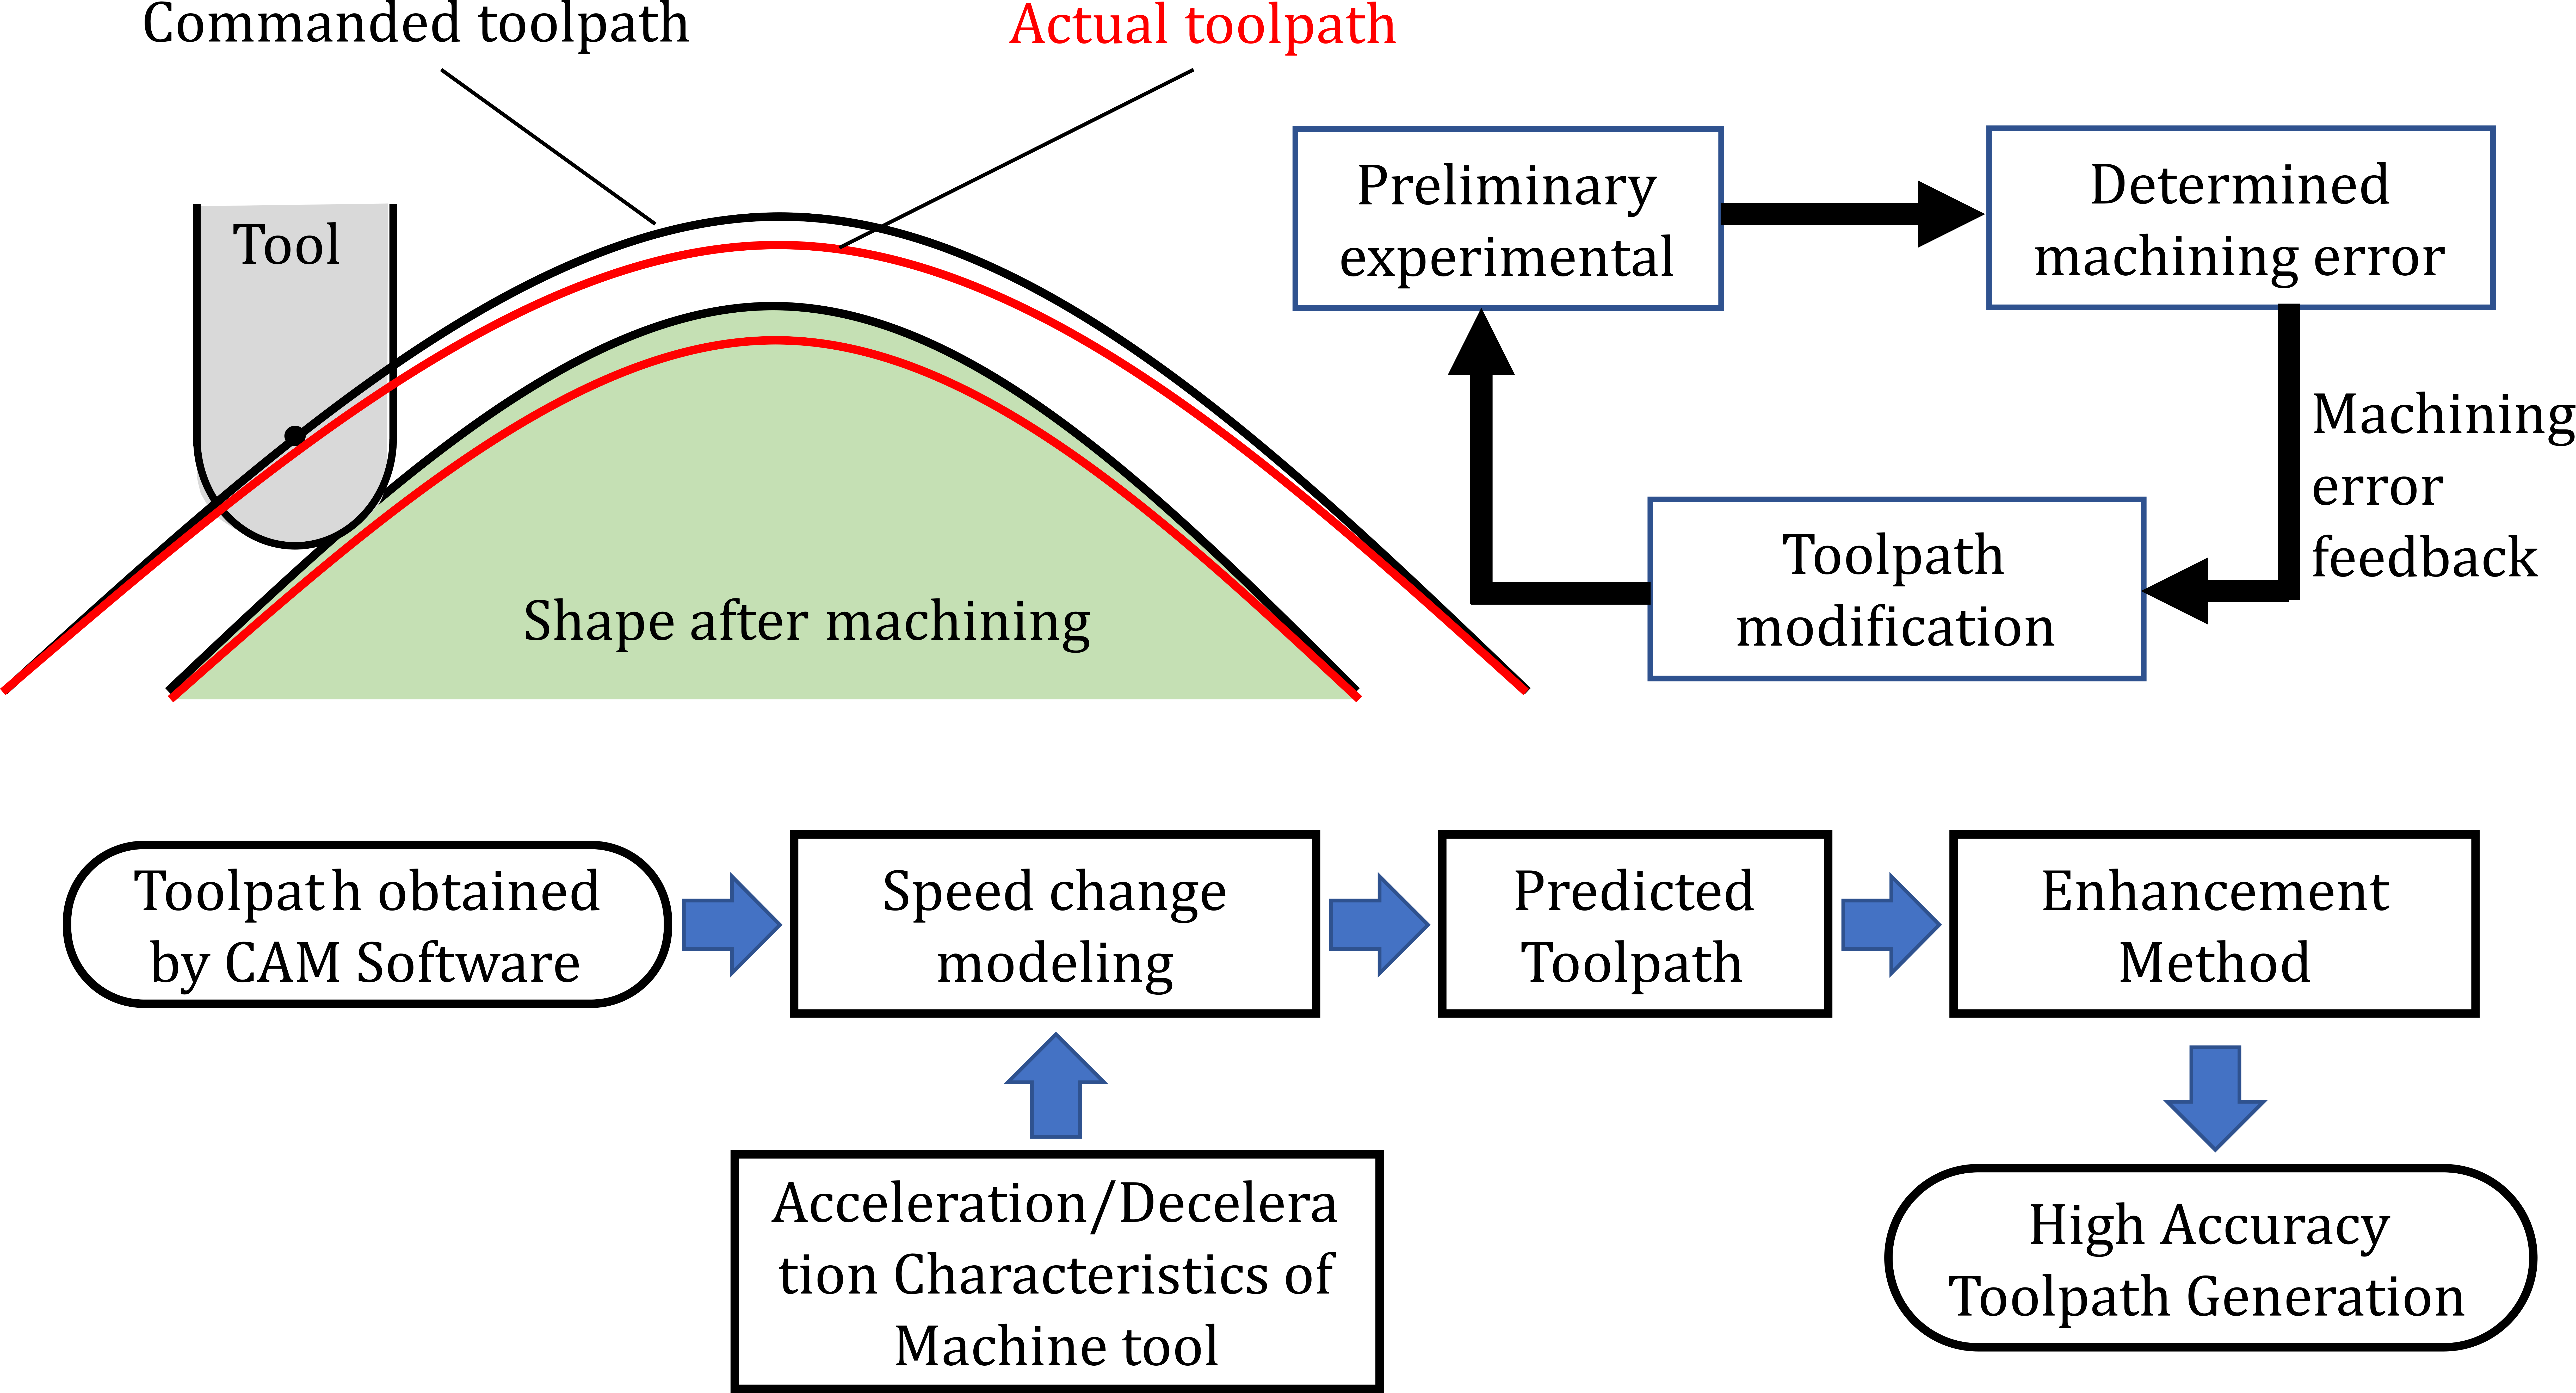 Prediction of Actual Toolpath and Enhancement of the Toolpath Accuracy Based on Identification of Feedrate Change Characteristics of Machine Tool